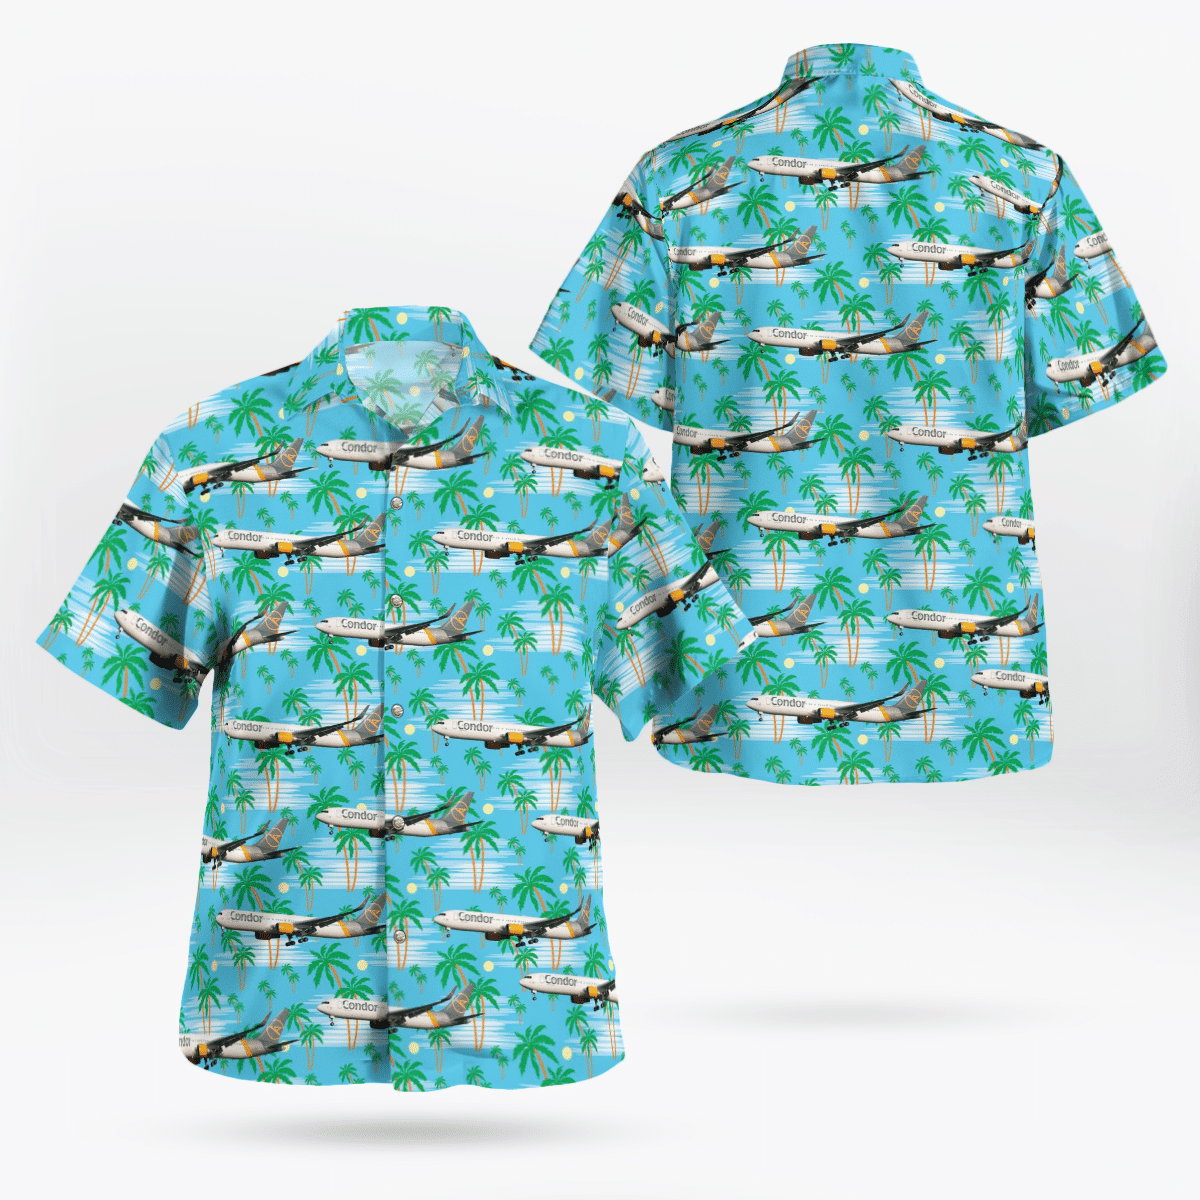 If you want to be noticed, wear These Trendy Hawaiian Shirt 132